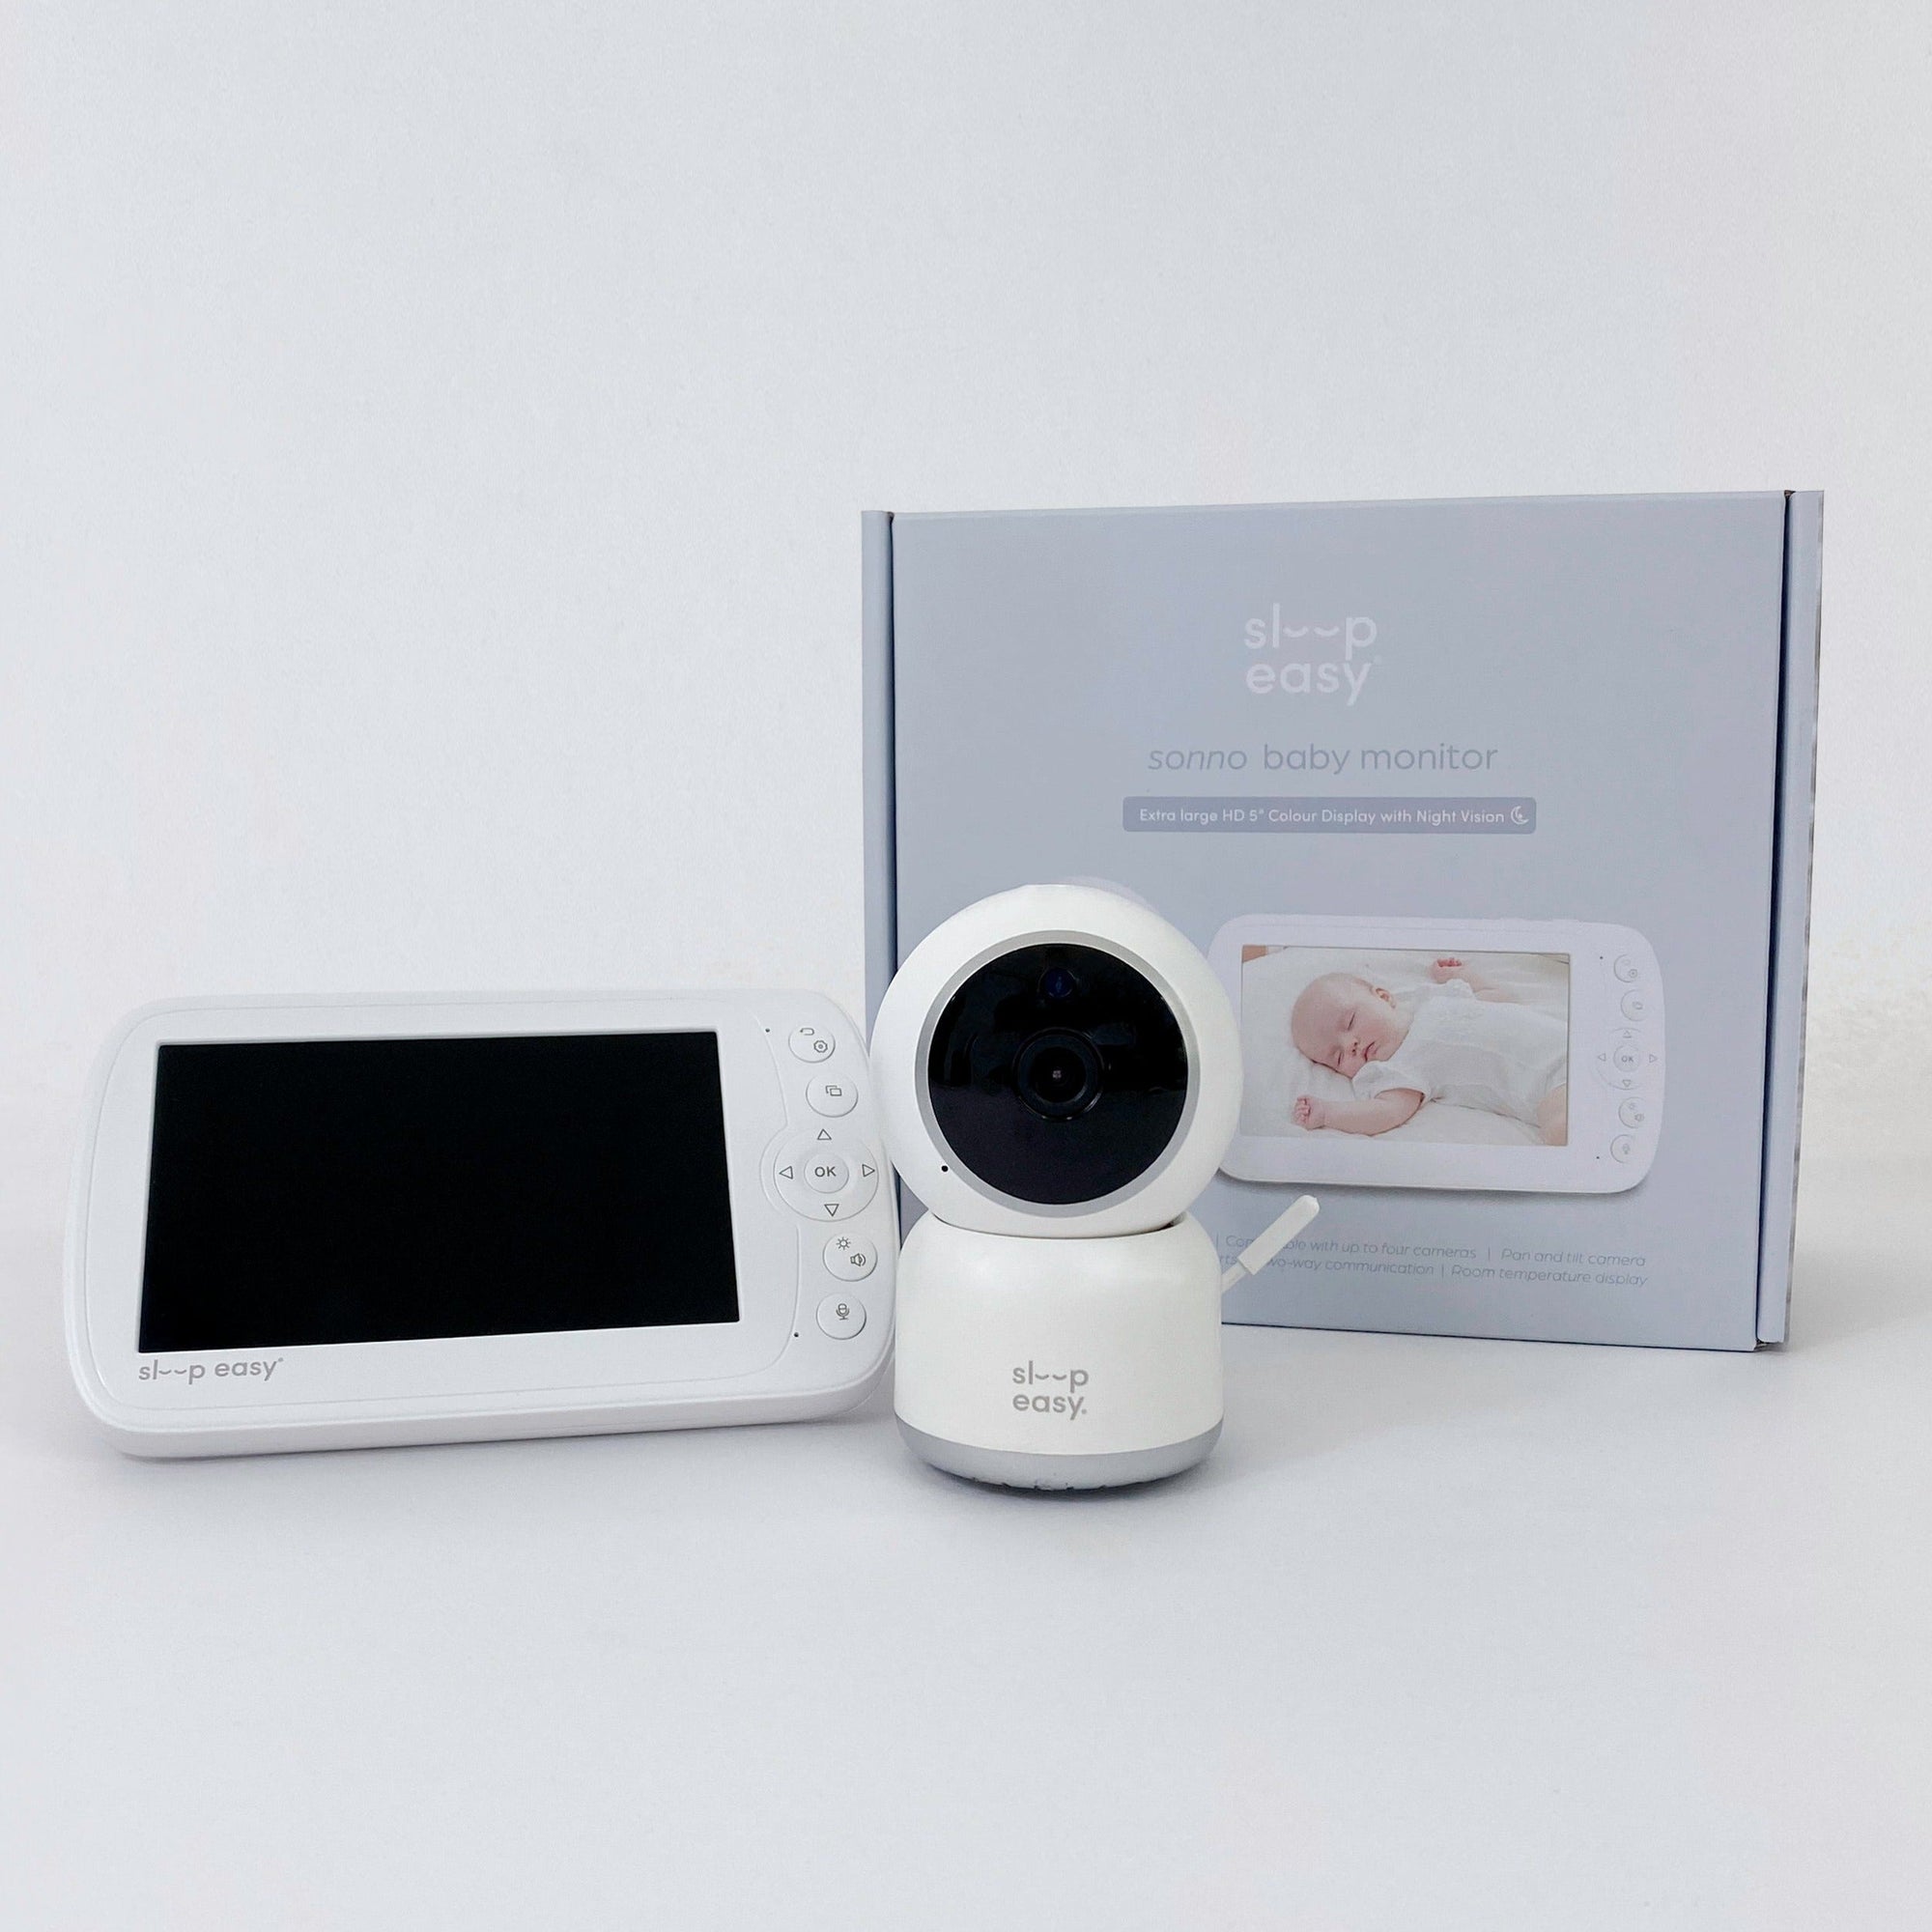 Sonno - 5"/12.7cm Crystal Clear Baby Monitor CAMERA